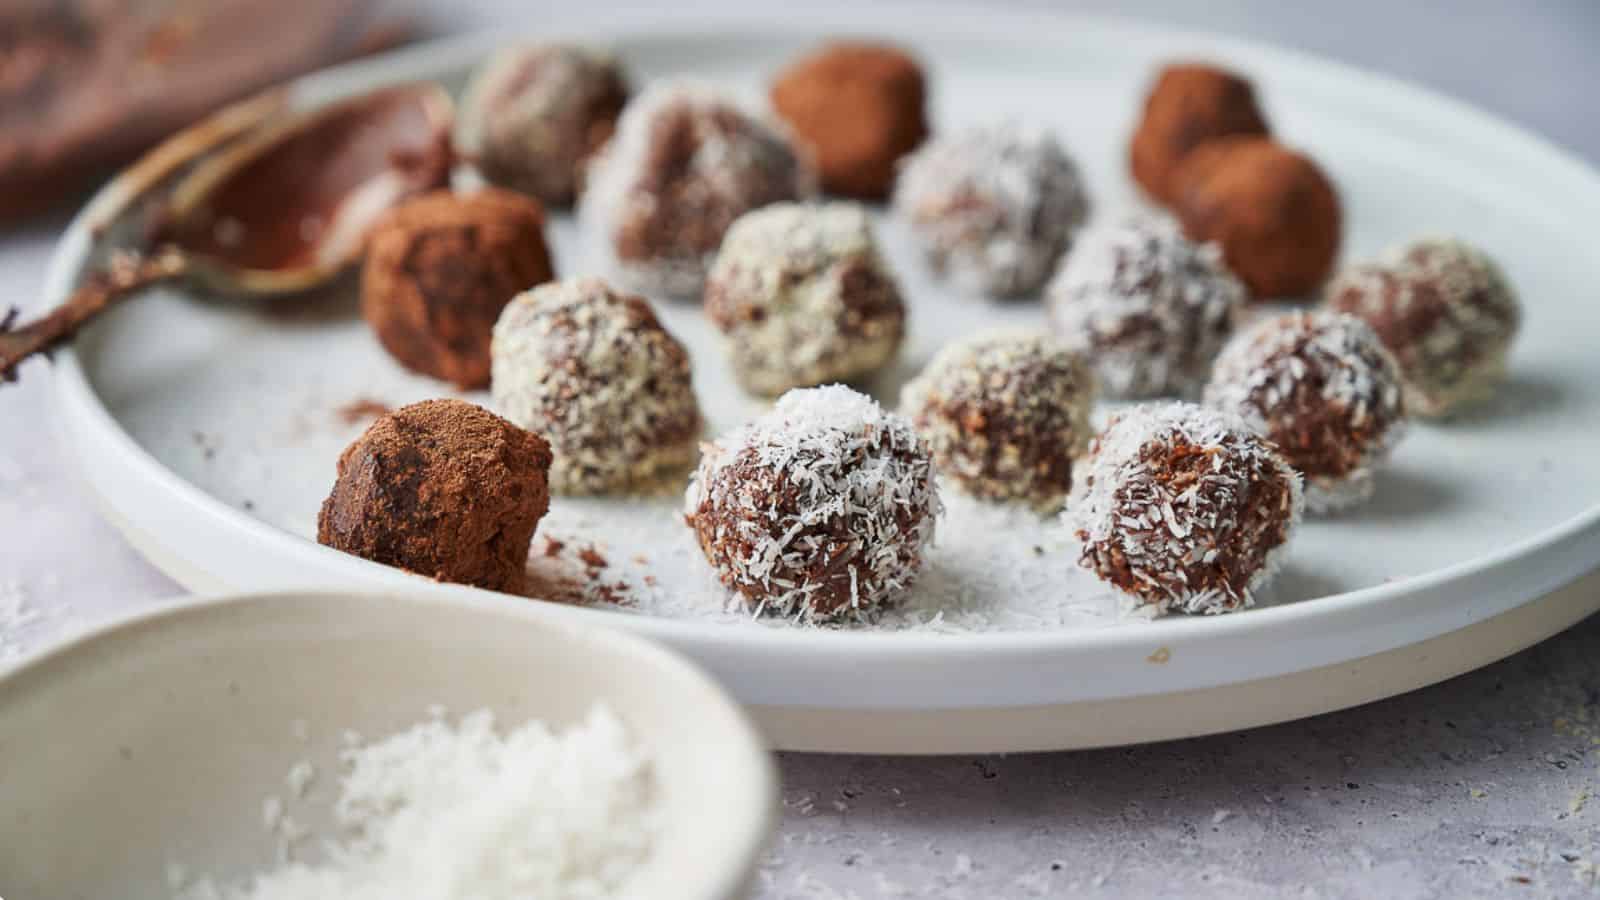 <p>Decadent, bite-sized delights. These truffles are perfect for both serving at gatherings or enjoying a quiet moment alone. A treat that screams sophistication.<br><strong>Get the Recipe: </strong><a href="https://www.splashoftaste.com/chocolate-truffles/?utm_source=msn&utm_medium=page&utm_campaign=msn">Chocolate Truffles</a></p>